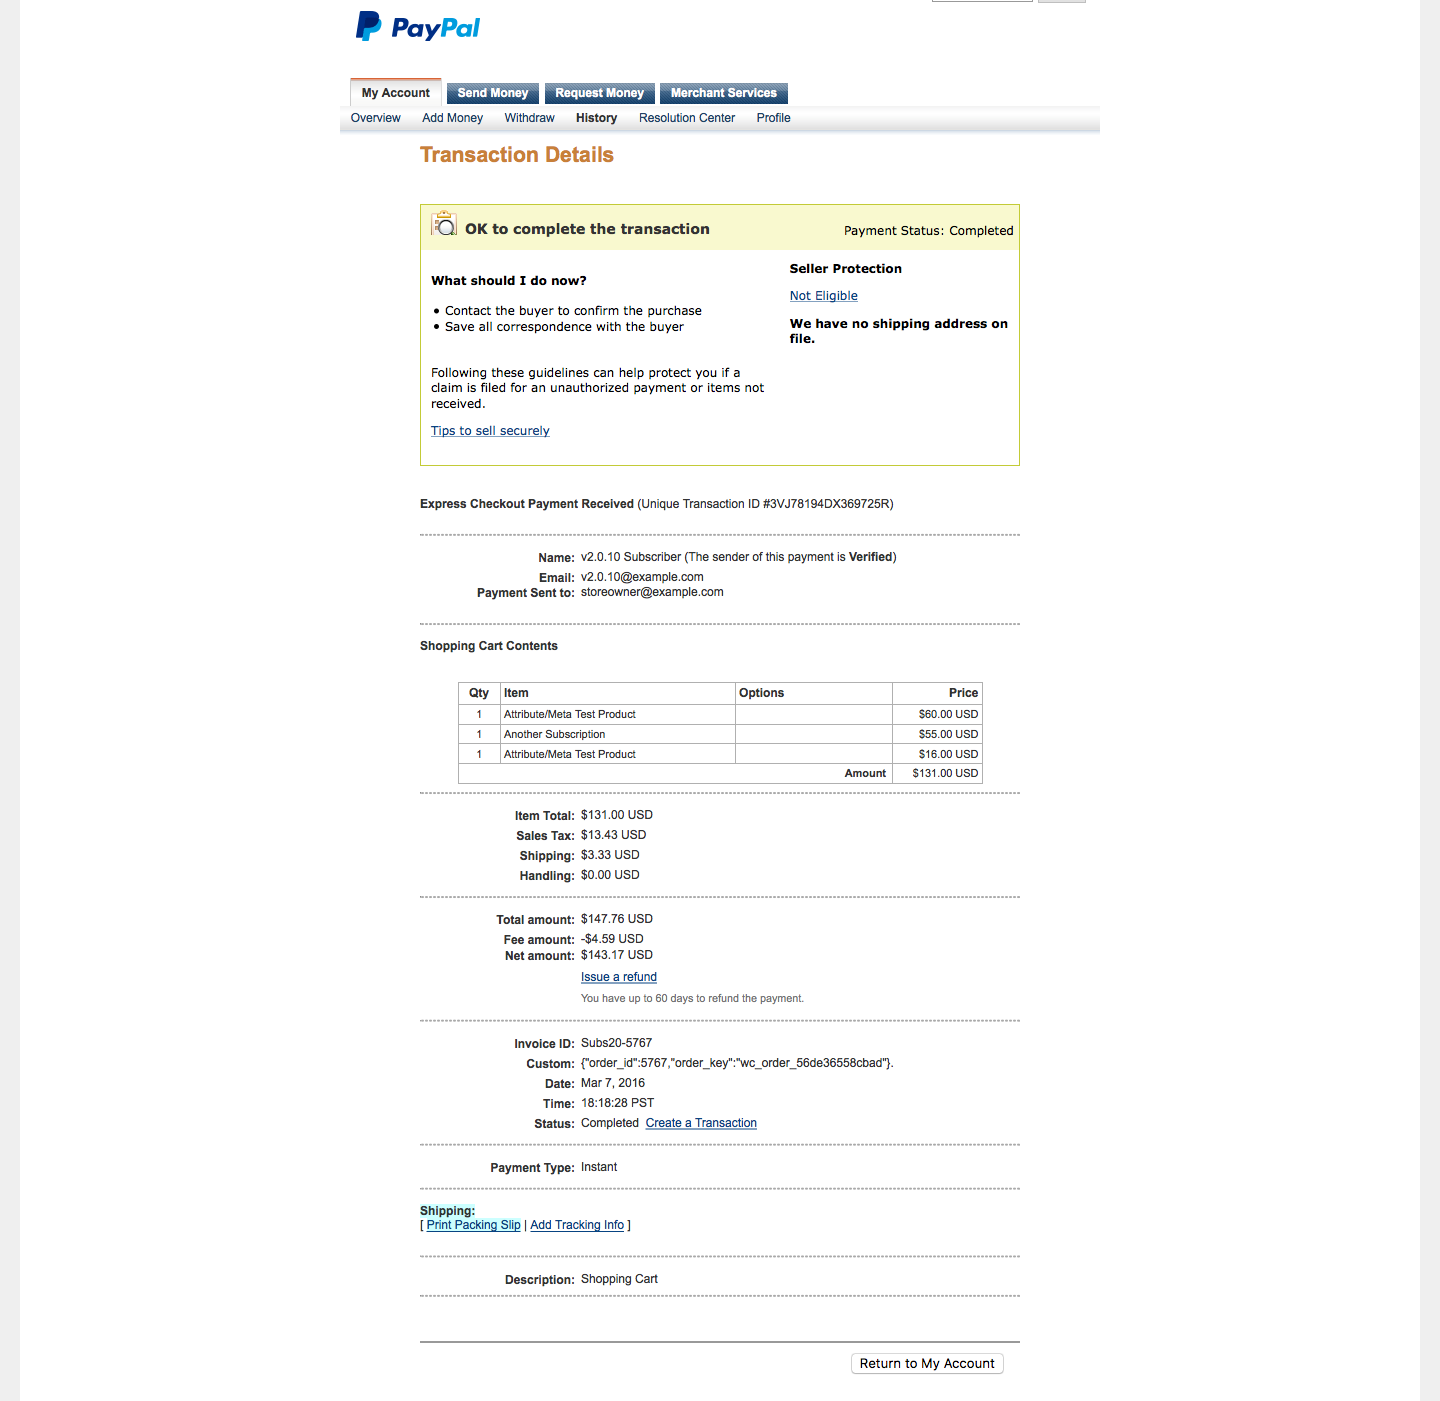 PayPal Initial Payment Transaction Details with Subscriptions 2.0.10: Line items are displayed, but no billing agreement is displayed